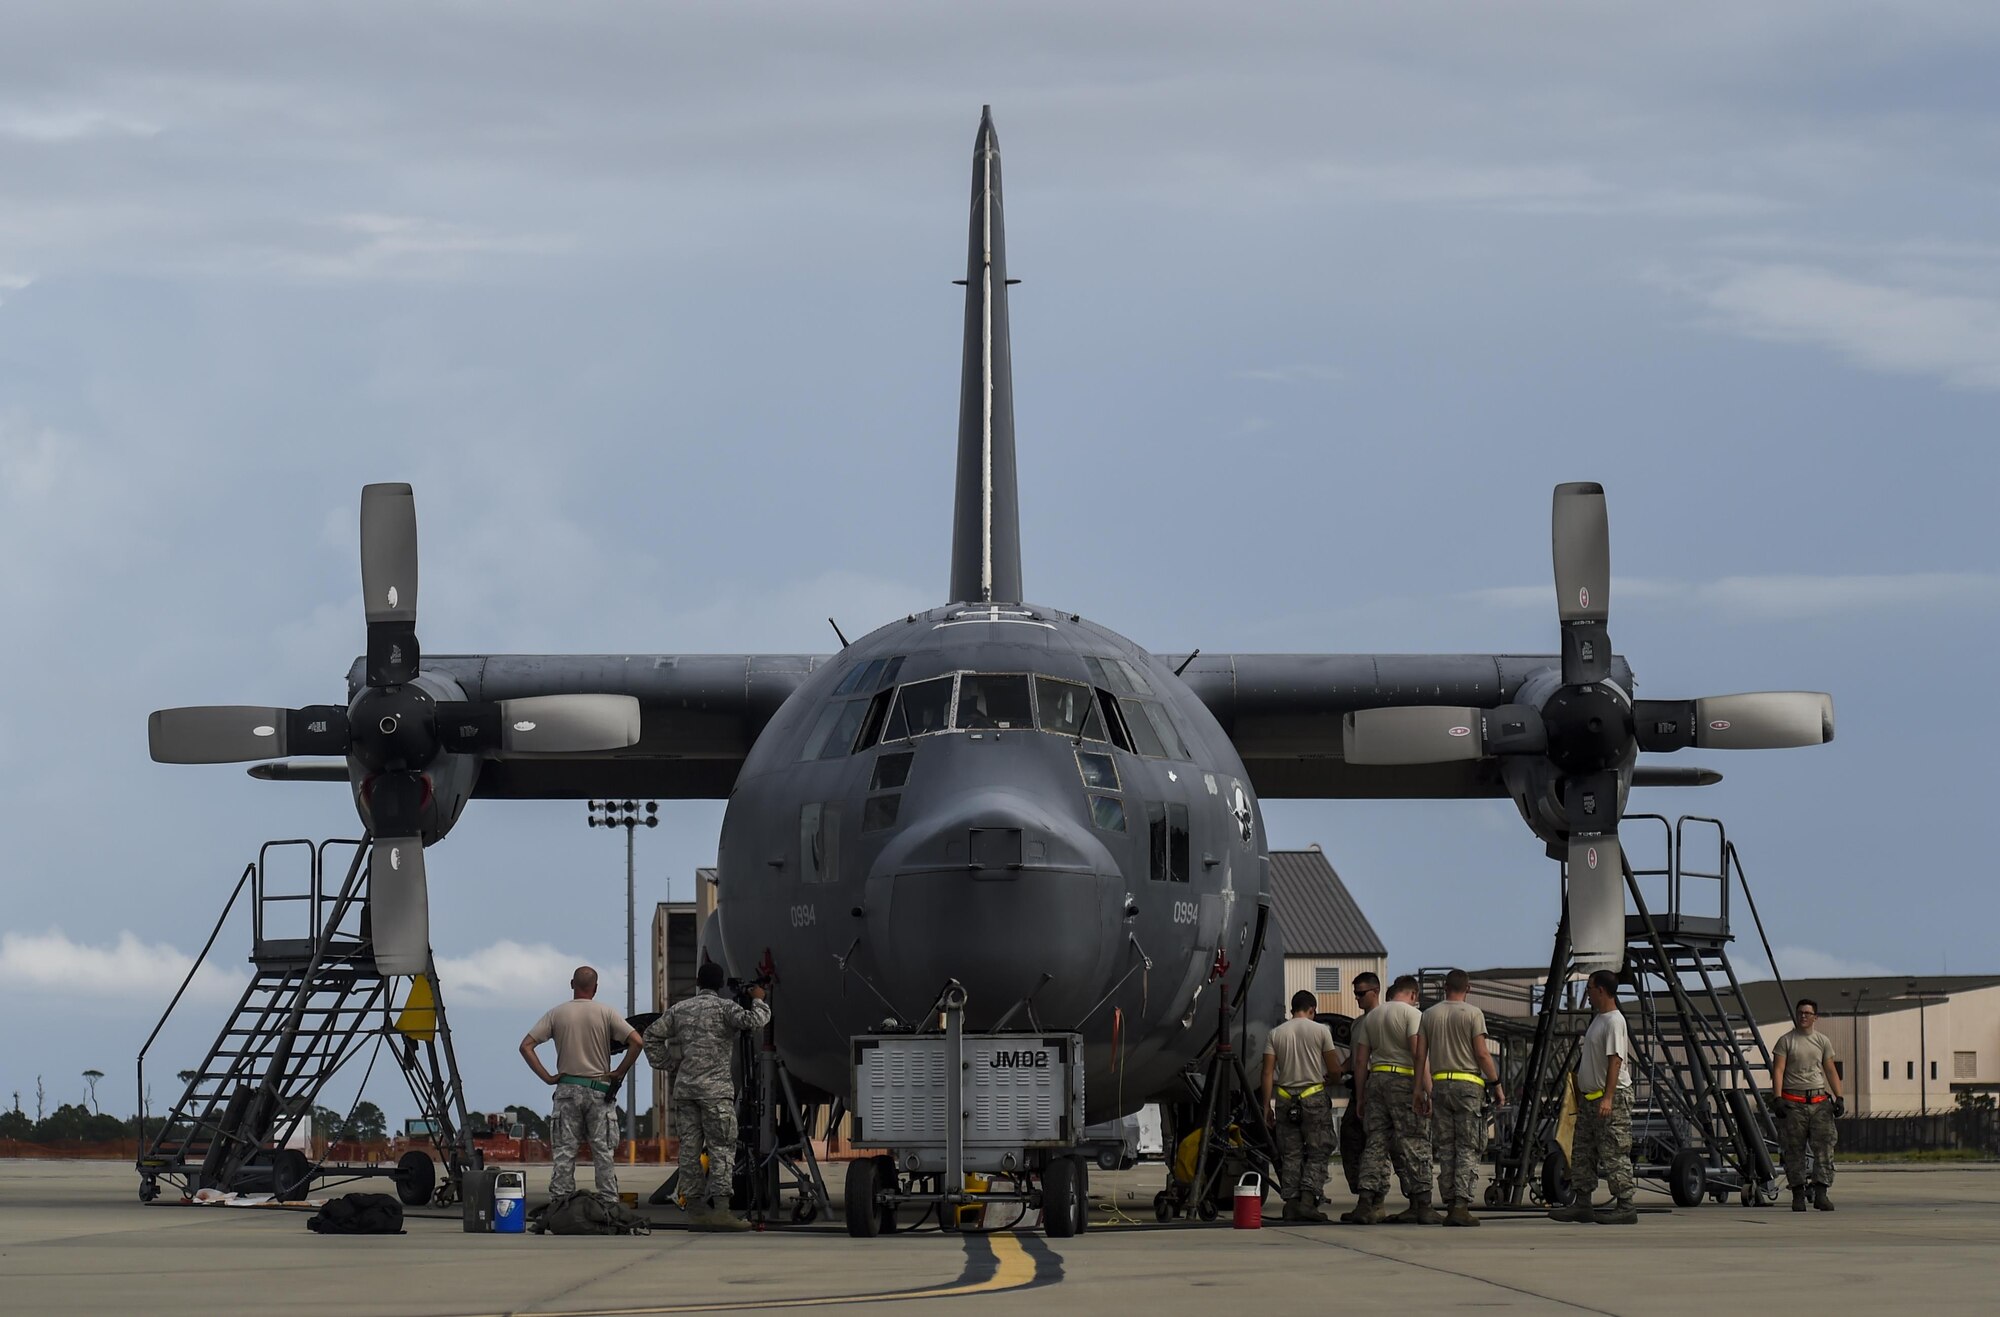 Airmen with the 1st Special Operations Wing lower an MC-130P Combat Shadow after removing both wings on Hurlburt Field, Fla., Aug. 5, 2015. The MC-130P Combat Shadow, “Team Shadow,” and an AC-130H Specter, “Wicked Wanda,” were towed to the Hurlburt Field Air Park Aug. 15, 2015. (U.S. Air Force photo by Airman Kai White/Released)